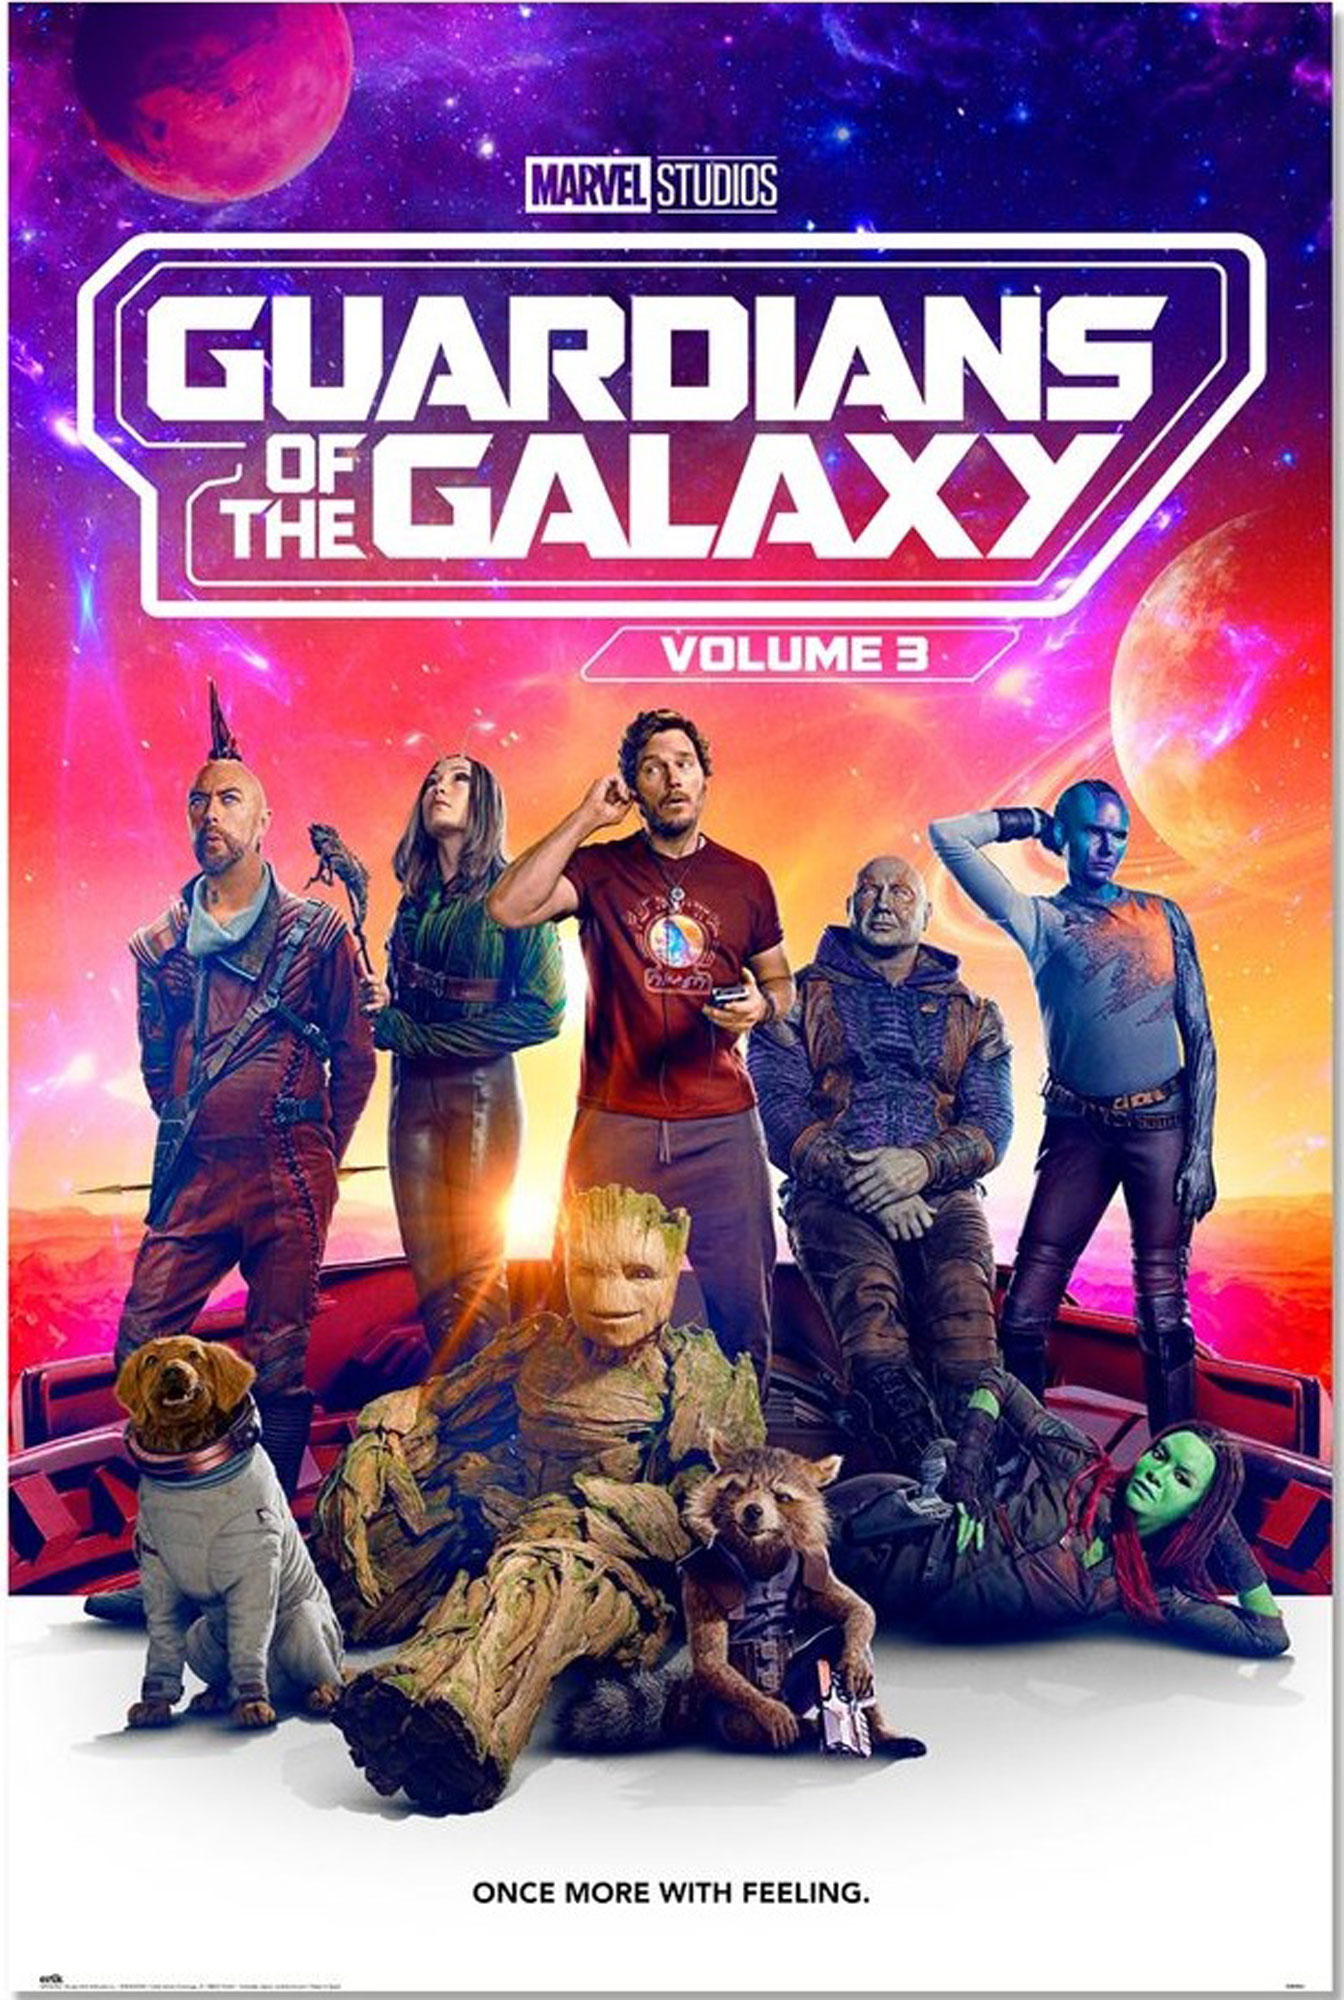 Galaxy - more once 3 Guardians of - the